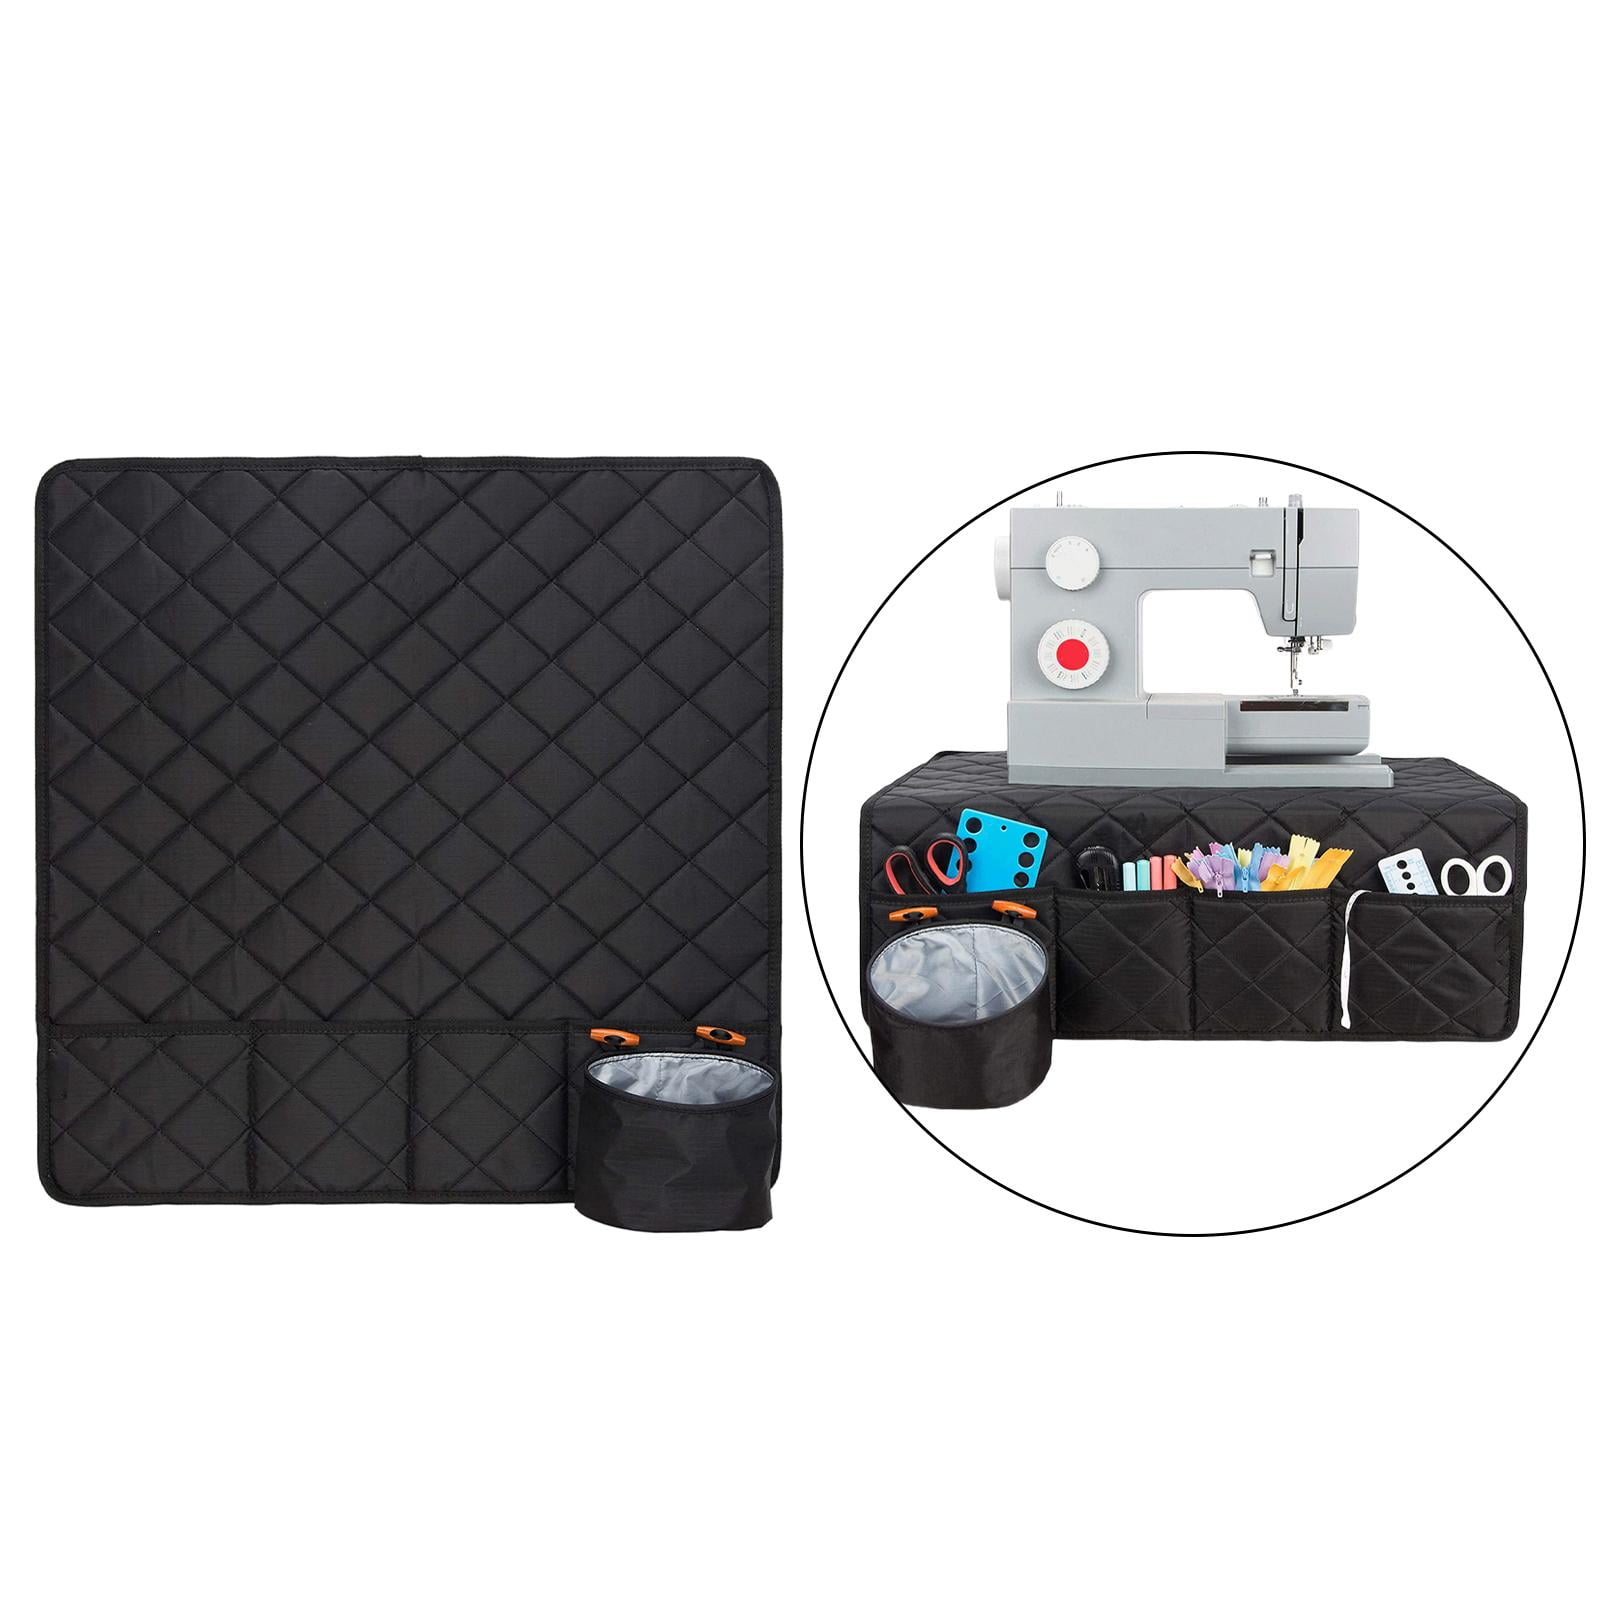 XXQGOMG Sewing Machine Mat Western Cowboy Sewing Machine Pad for Table with  Pockets Water-Resistant Foldable Sewing Machine Dust Cover Sewing Supplies